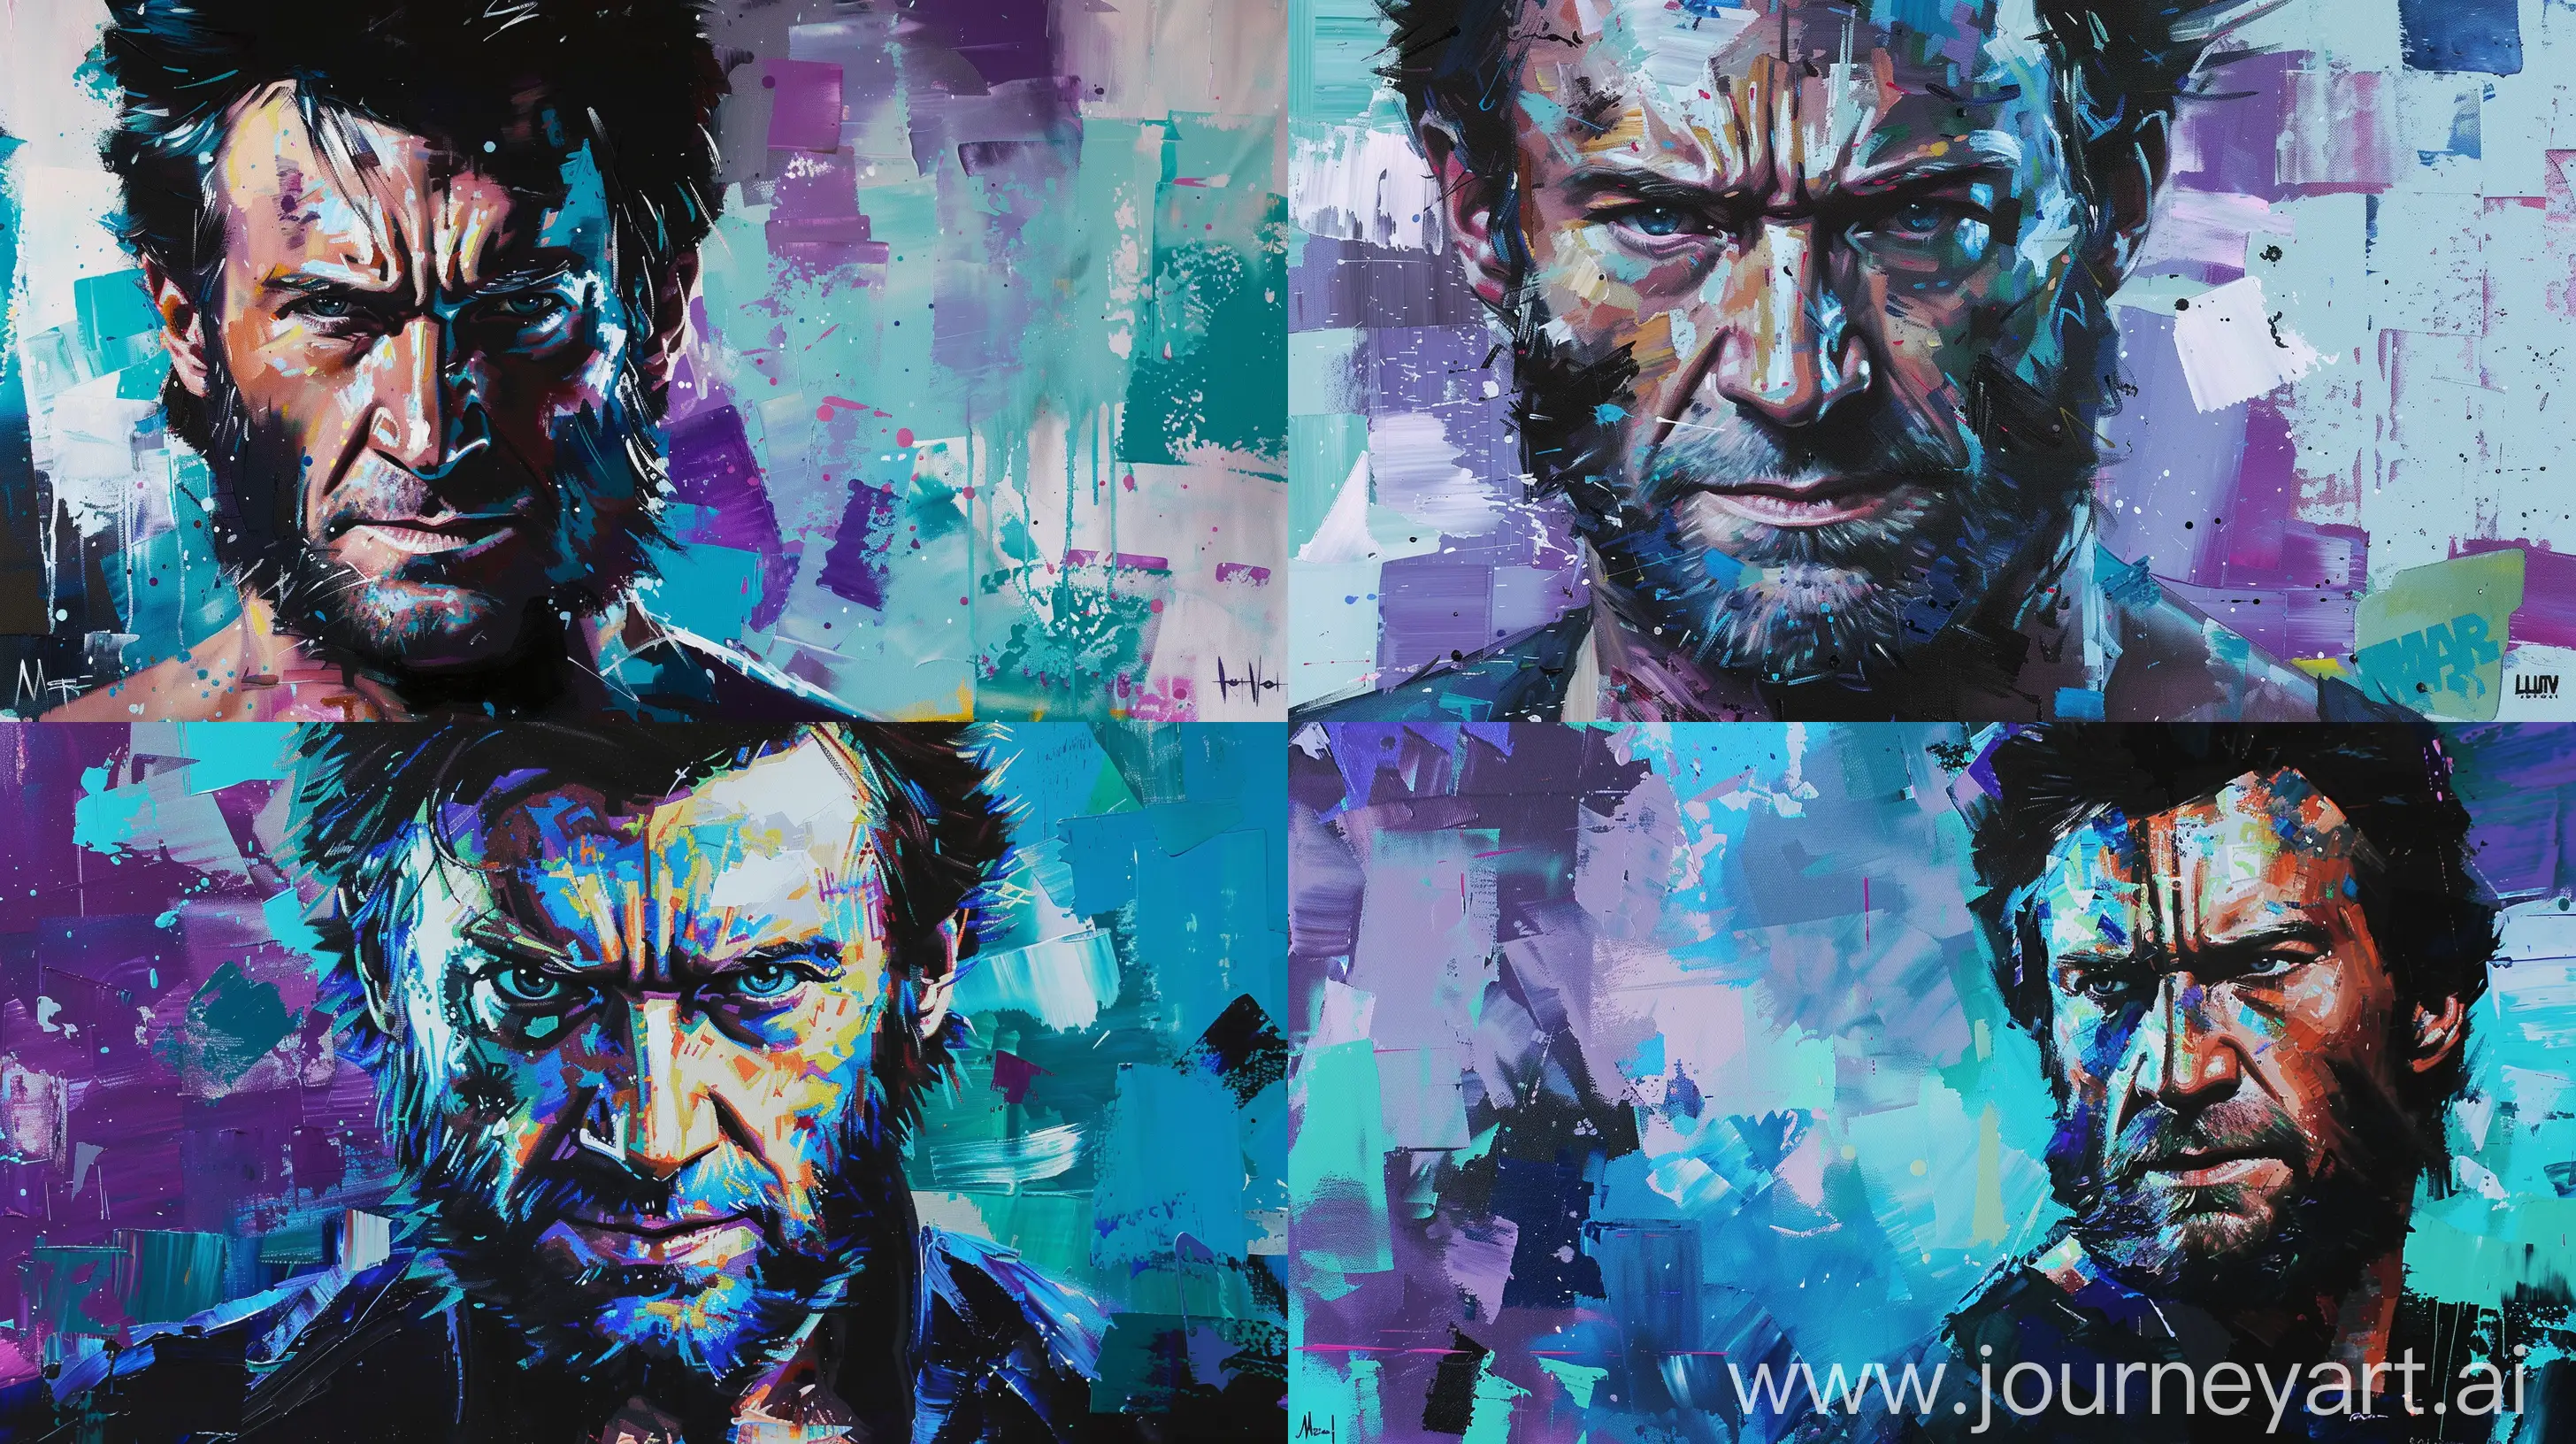 oil painting portrait of huge jackman as wolverine in star wars style with a color palette of bright blues, cyan, blacks, white, and a soft greenish-blue and the background is bright pastel purple with different cool textures. There are also touches of bright skin tone --ar 16:9 